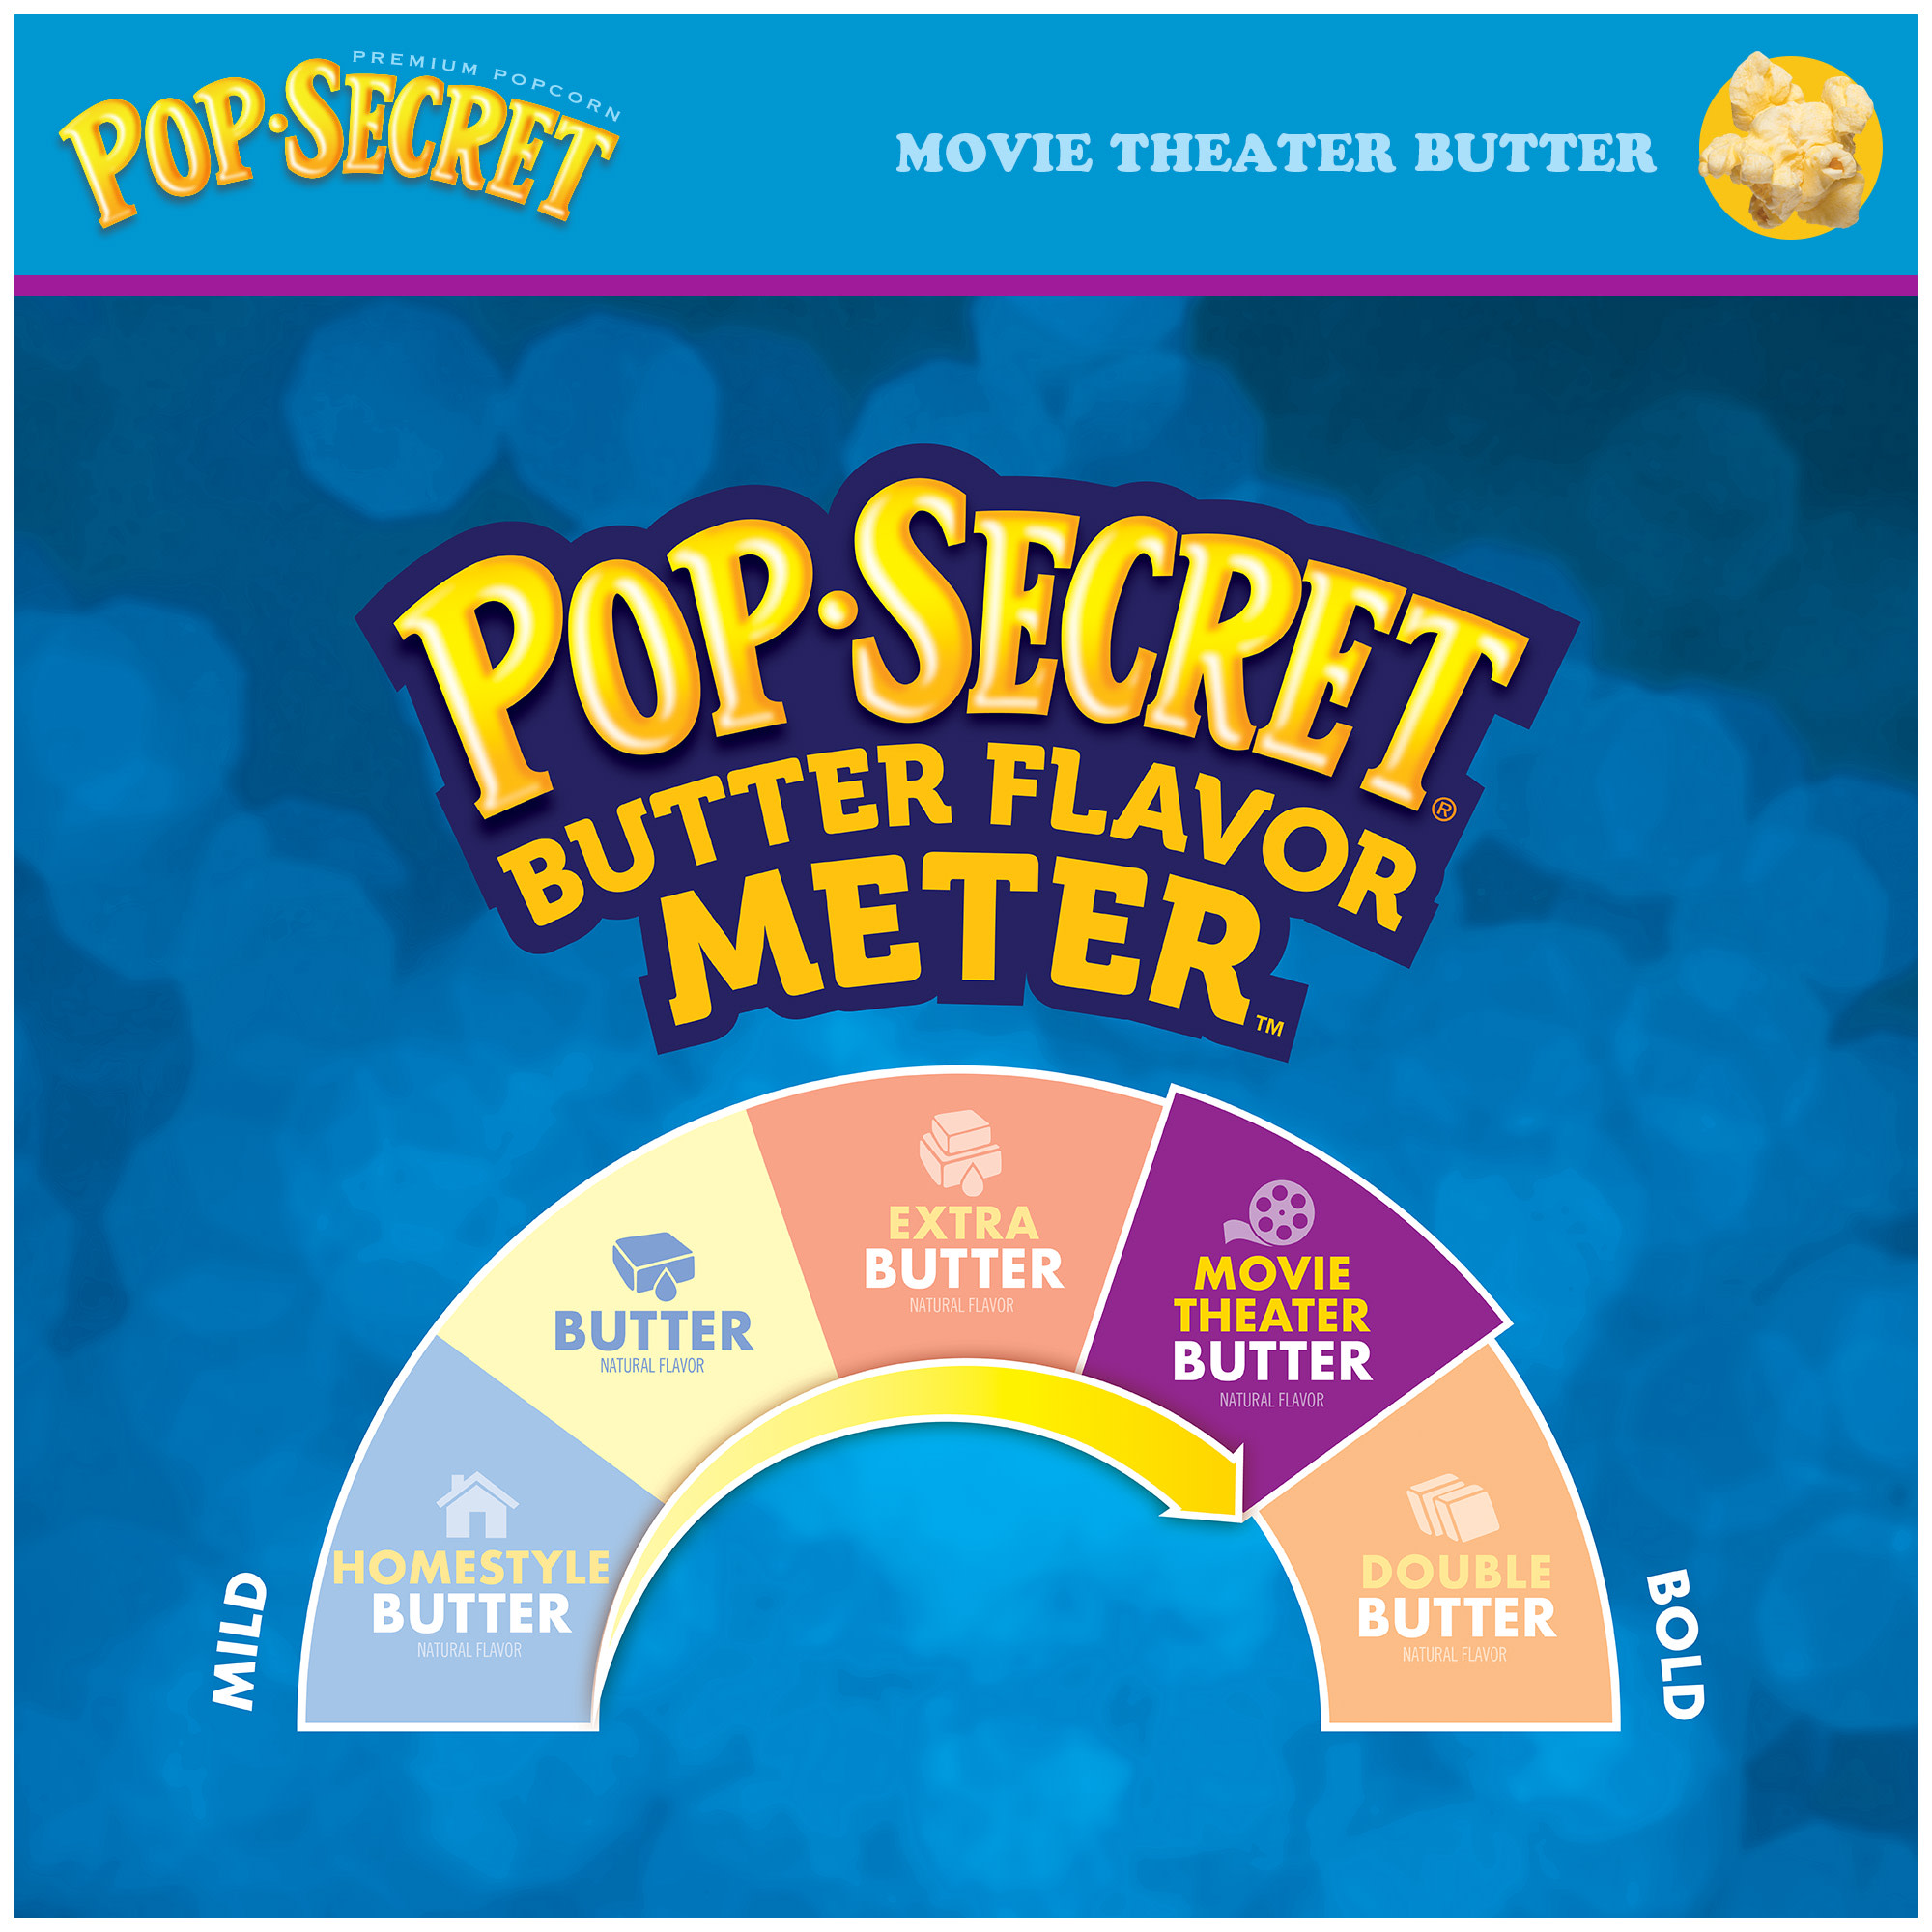 Pop Secret Microwave Popcorn, Movie Theater Butter, Flavor, 3 oz Sharing Bags, 12 Ct - image 3 of 10